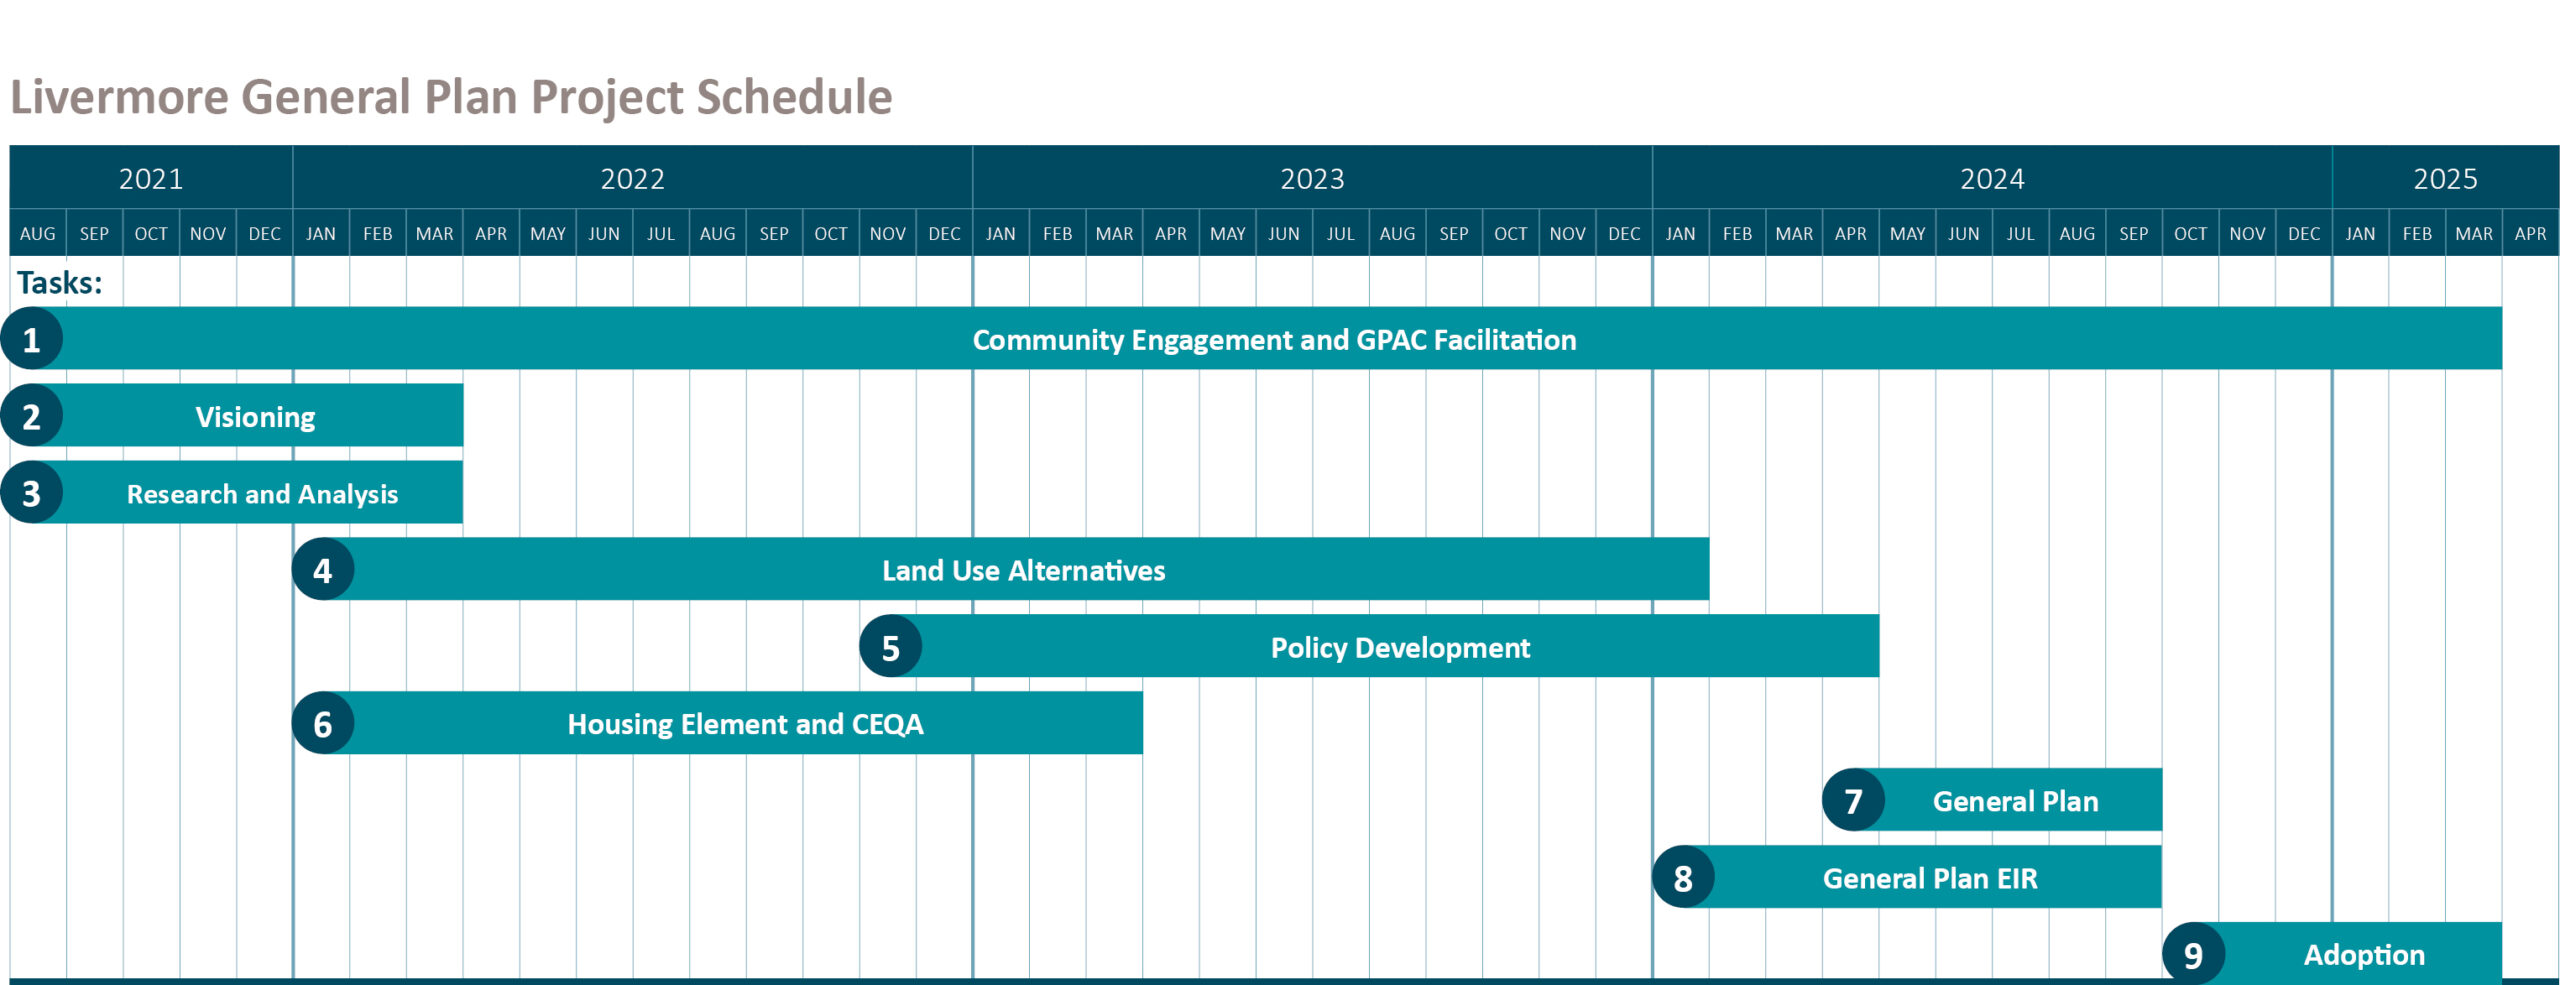 Project schedule for the Livermore General Plan Update, updated July 2023.